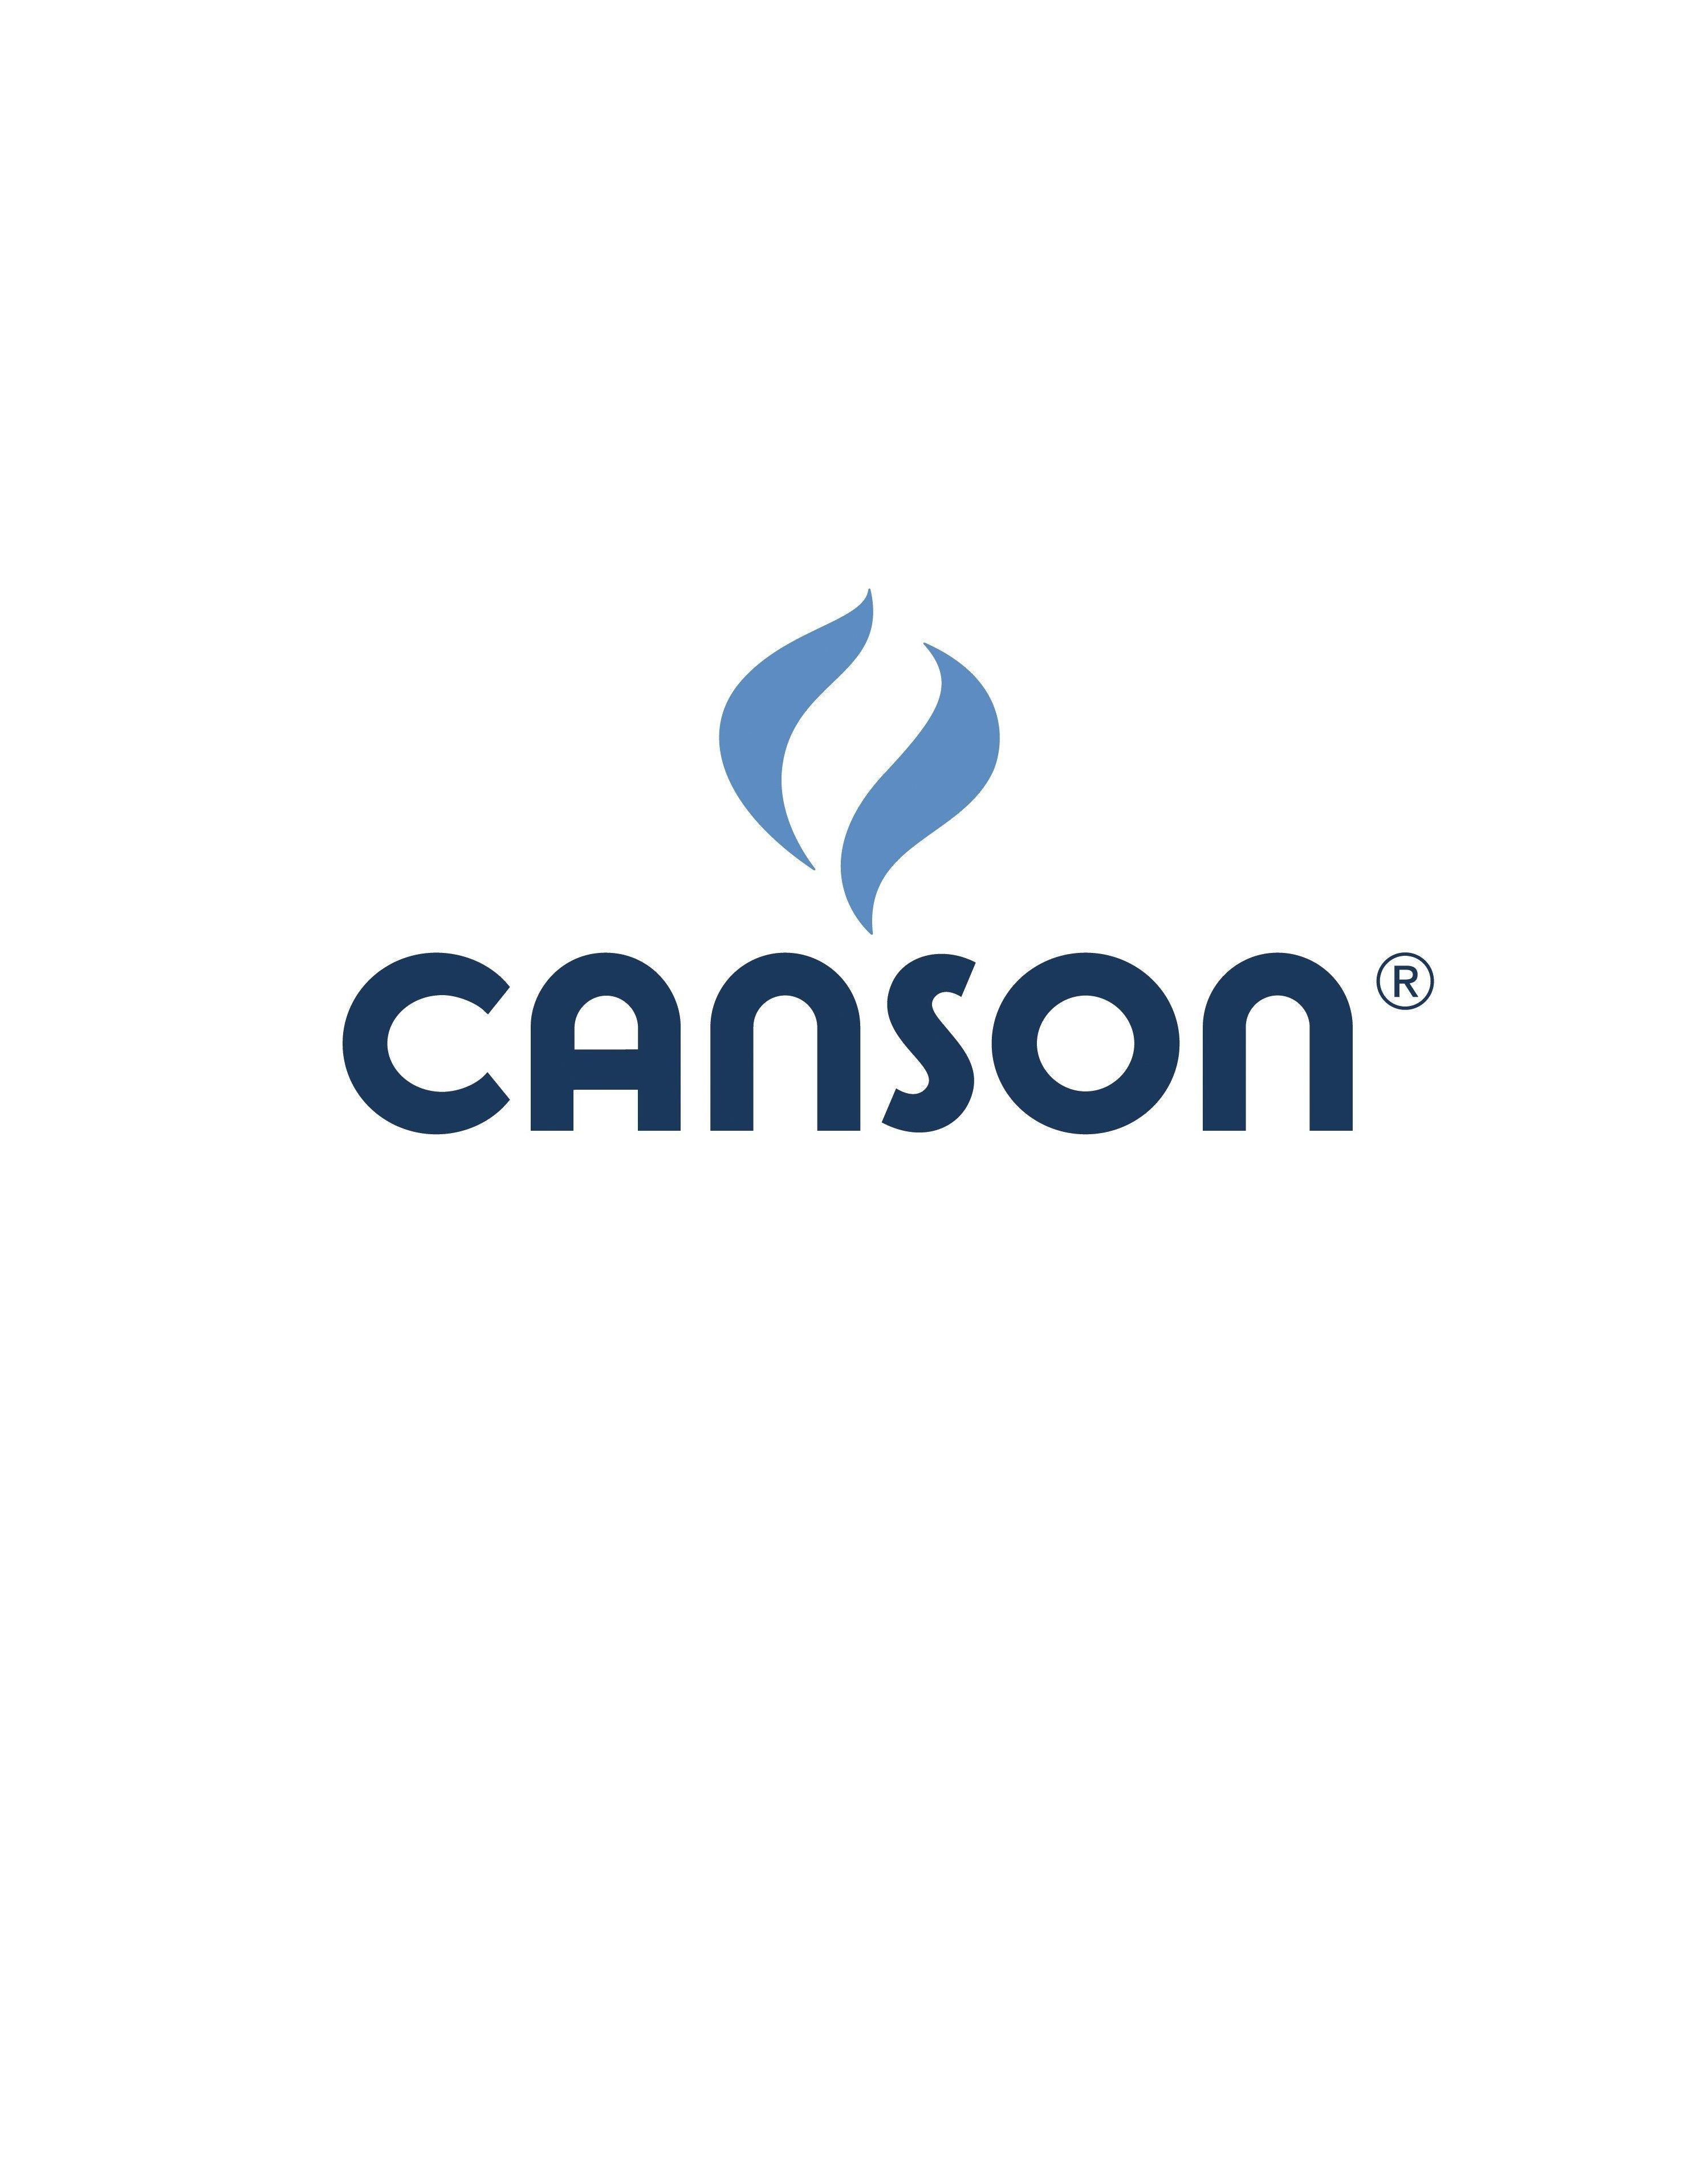 Canson Logo - CANSON' logo | CANSON ® | Pinterest | Sketches, Urban sketching y ...